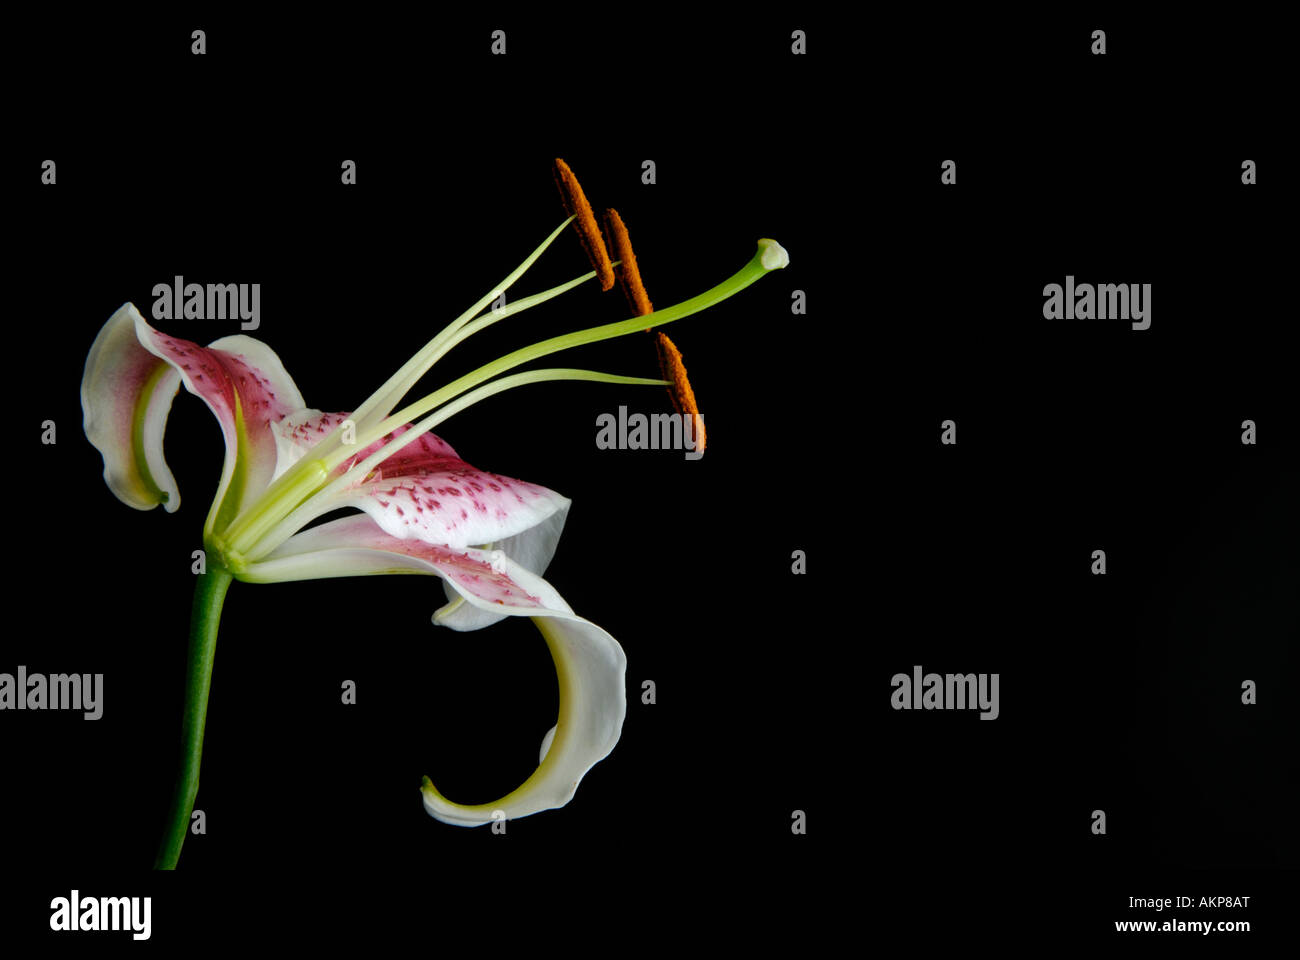 Cross section of flower showing ovary, carpel, stamens and other reproductive structures parts Stock Photo